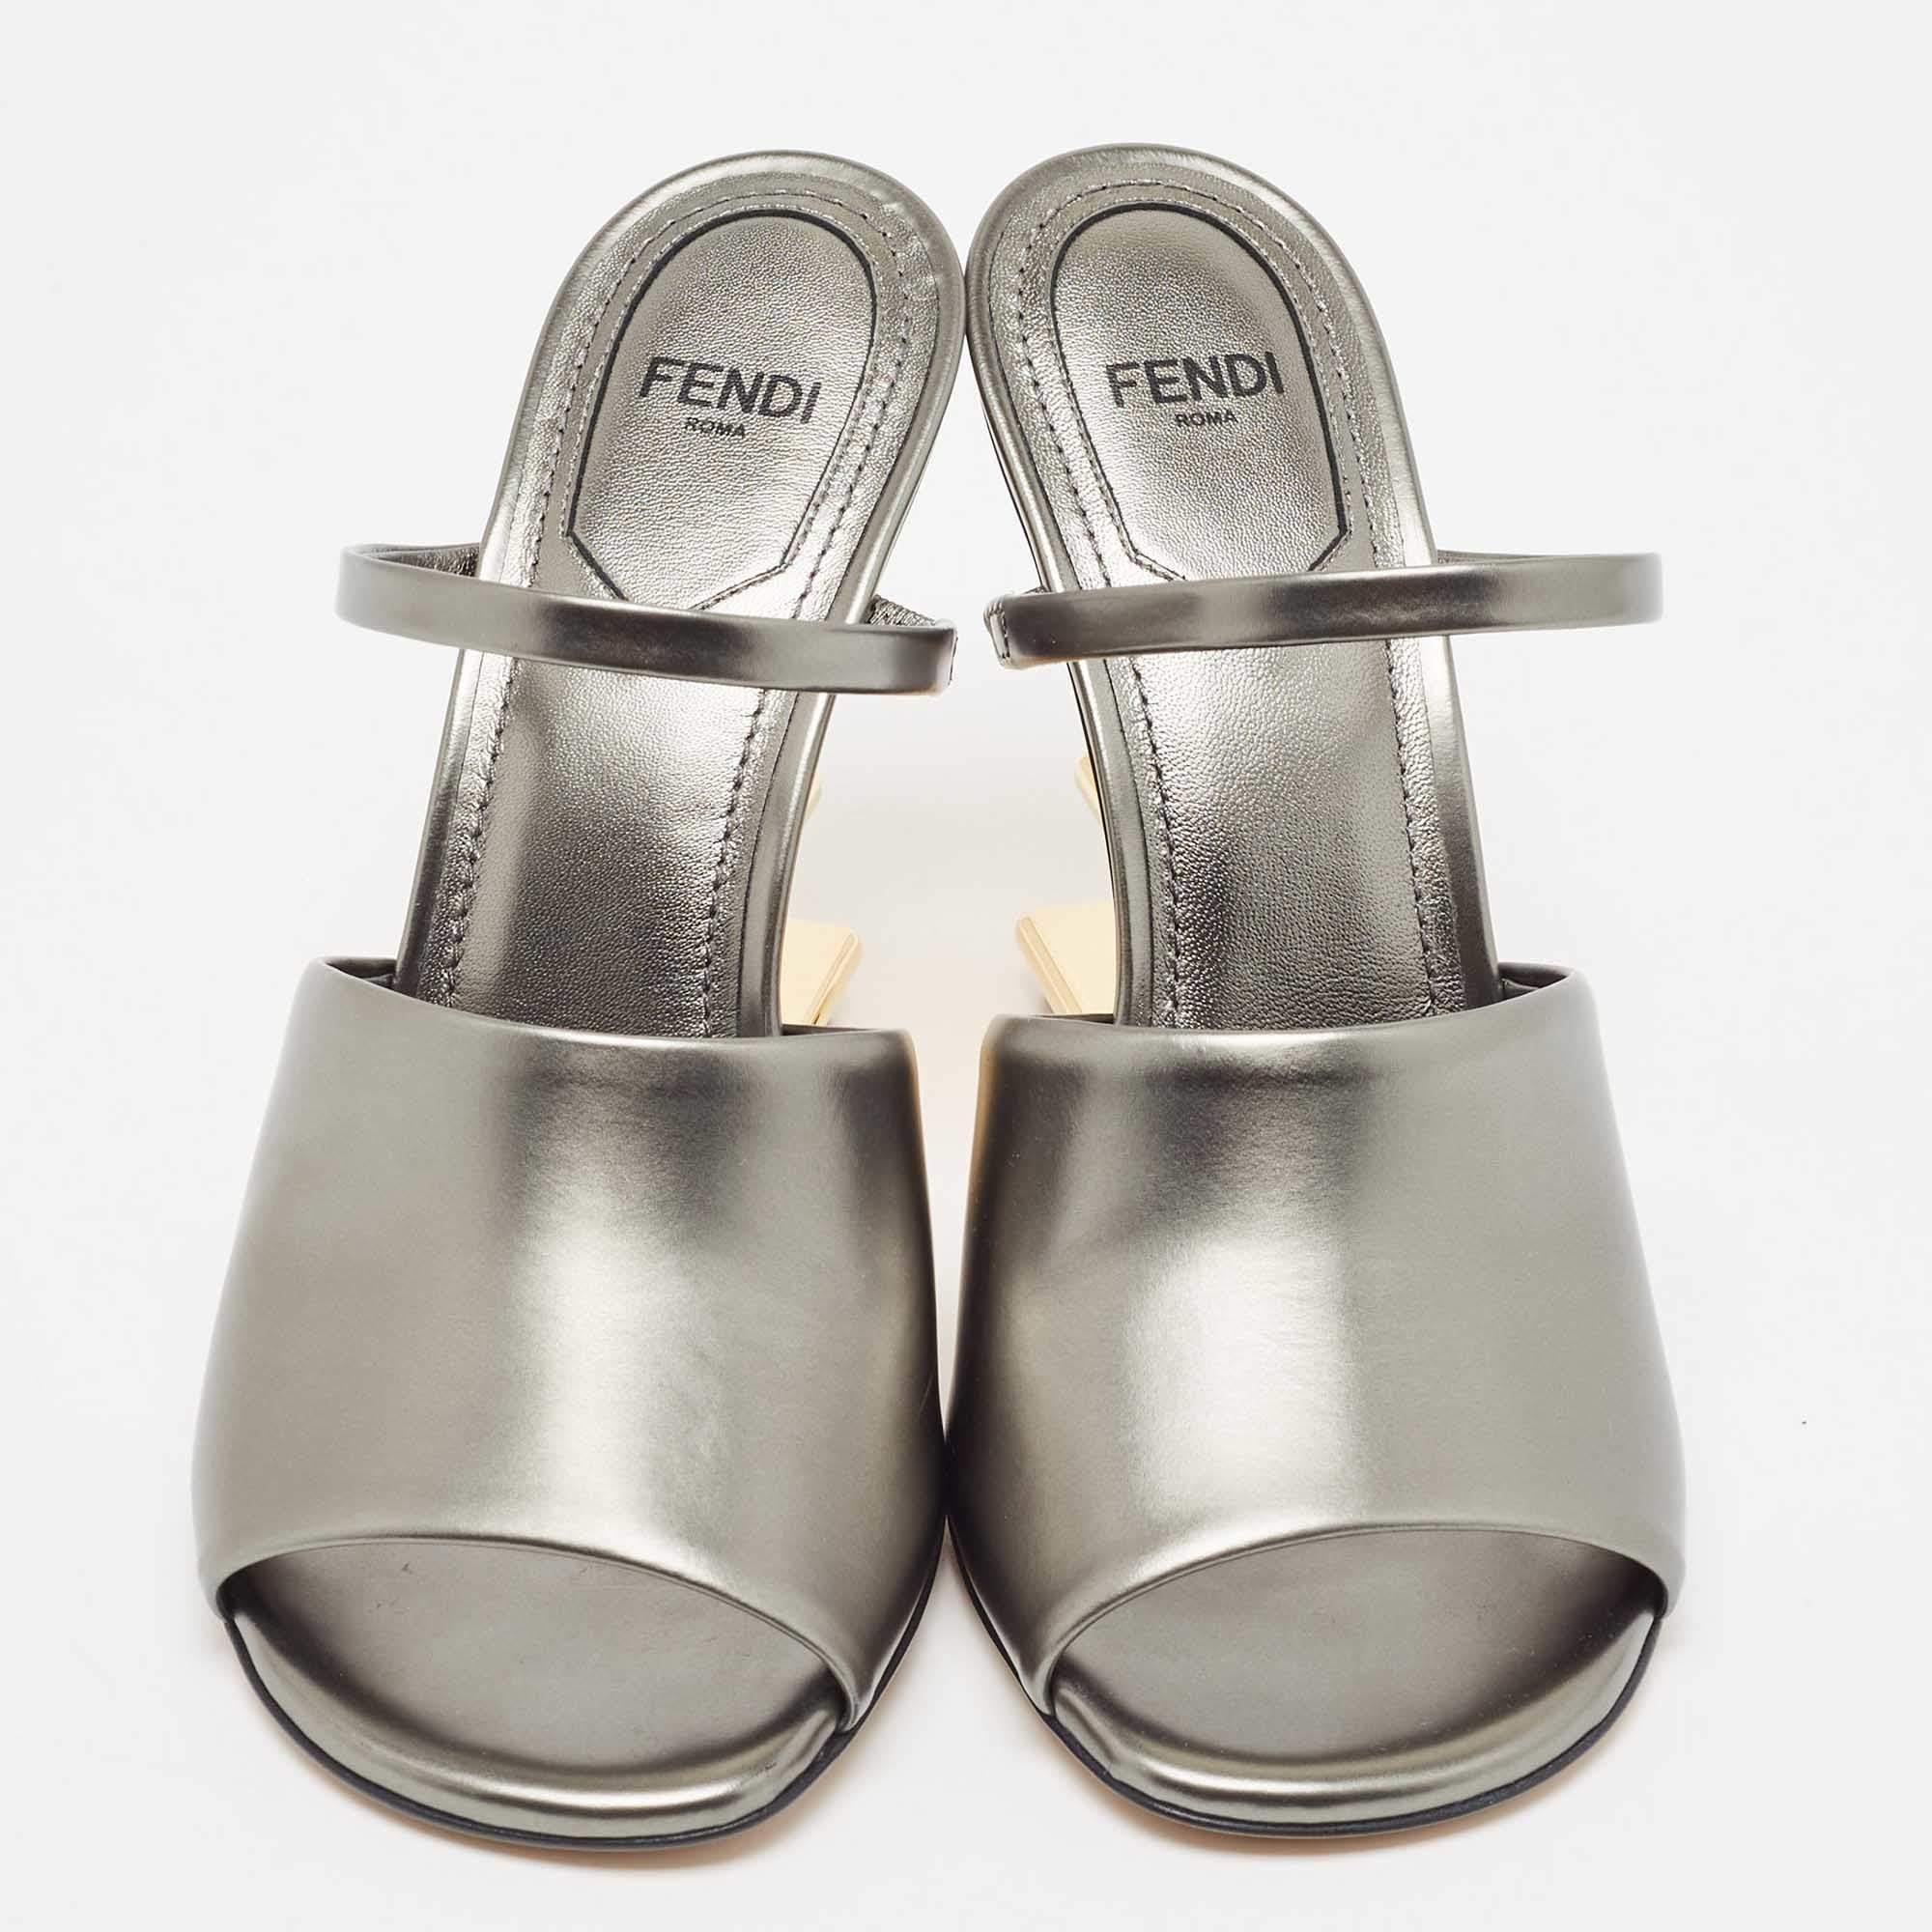 These sandals will offer you both luxury and comfort. Made from quality materials, they come in a versatile shade and are equipped with comfortable insoles.

Includes: Original Dustbag, Original Box, Info Booklet